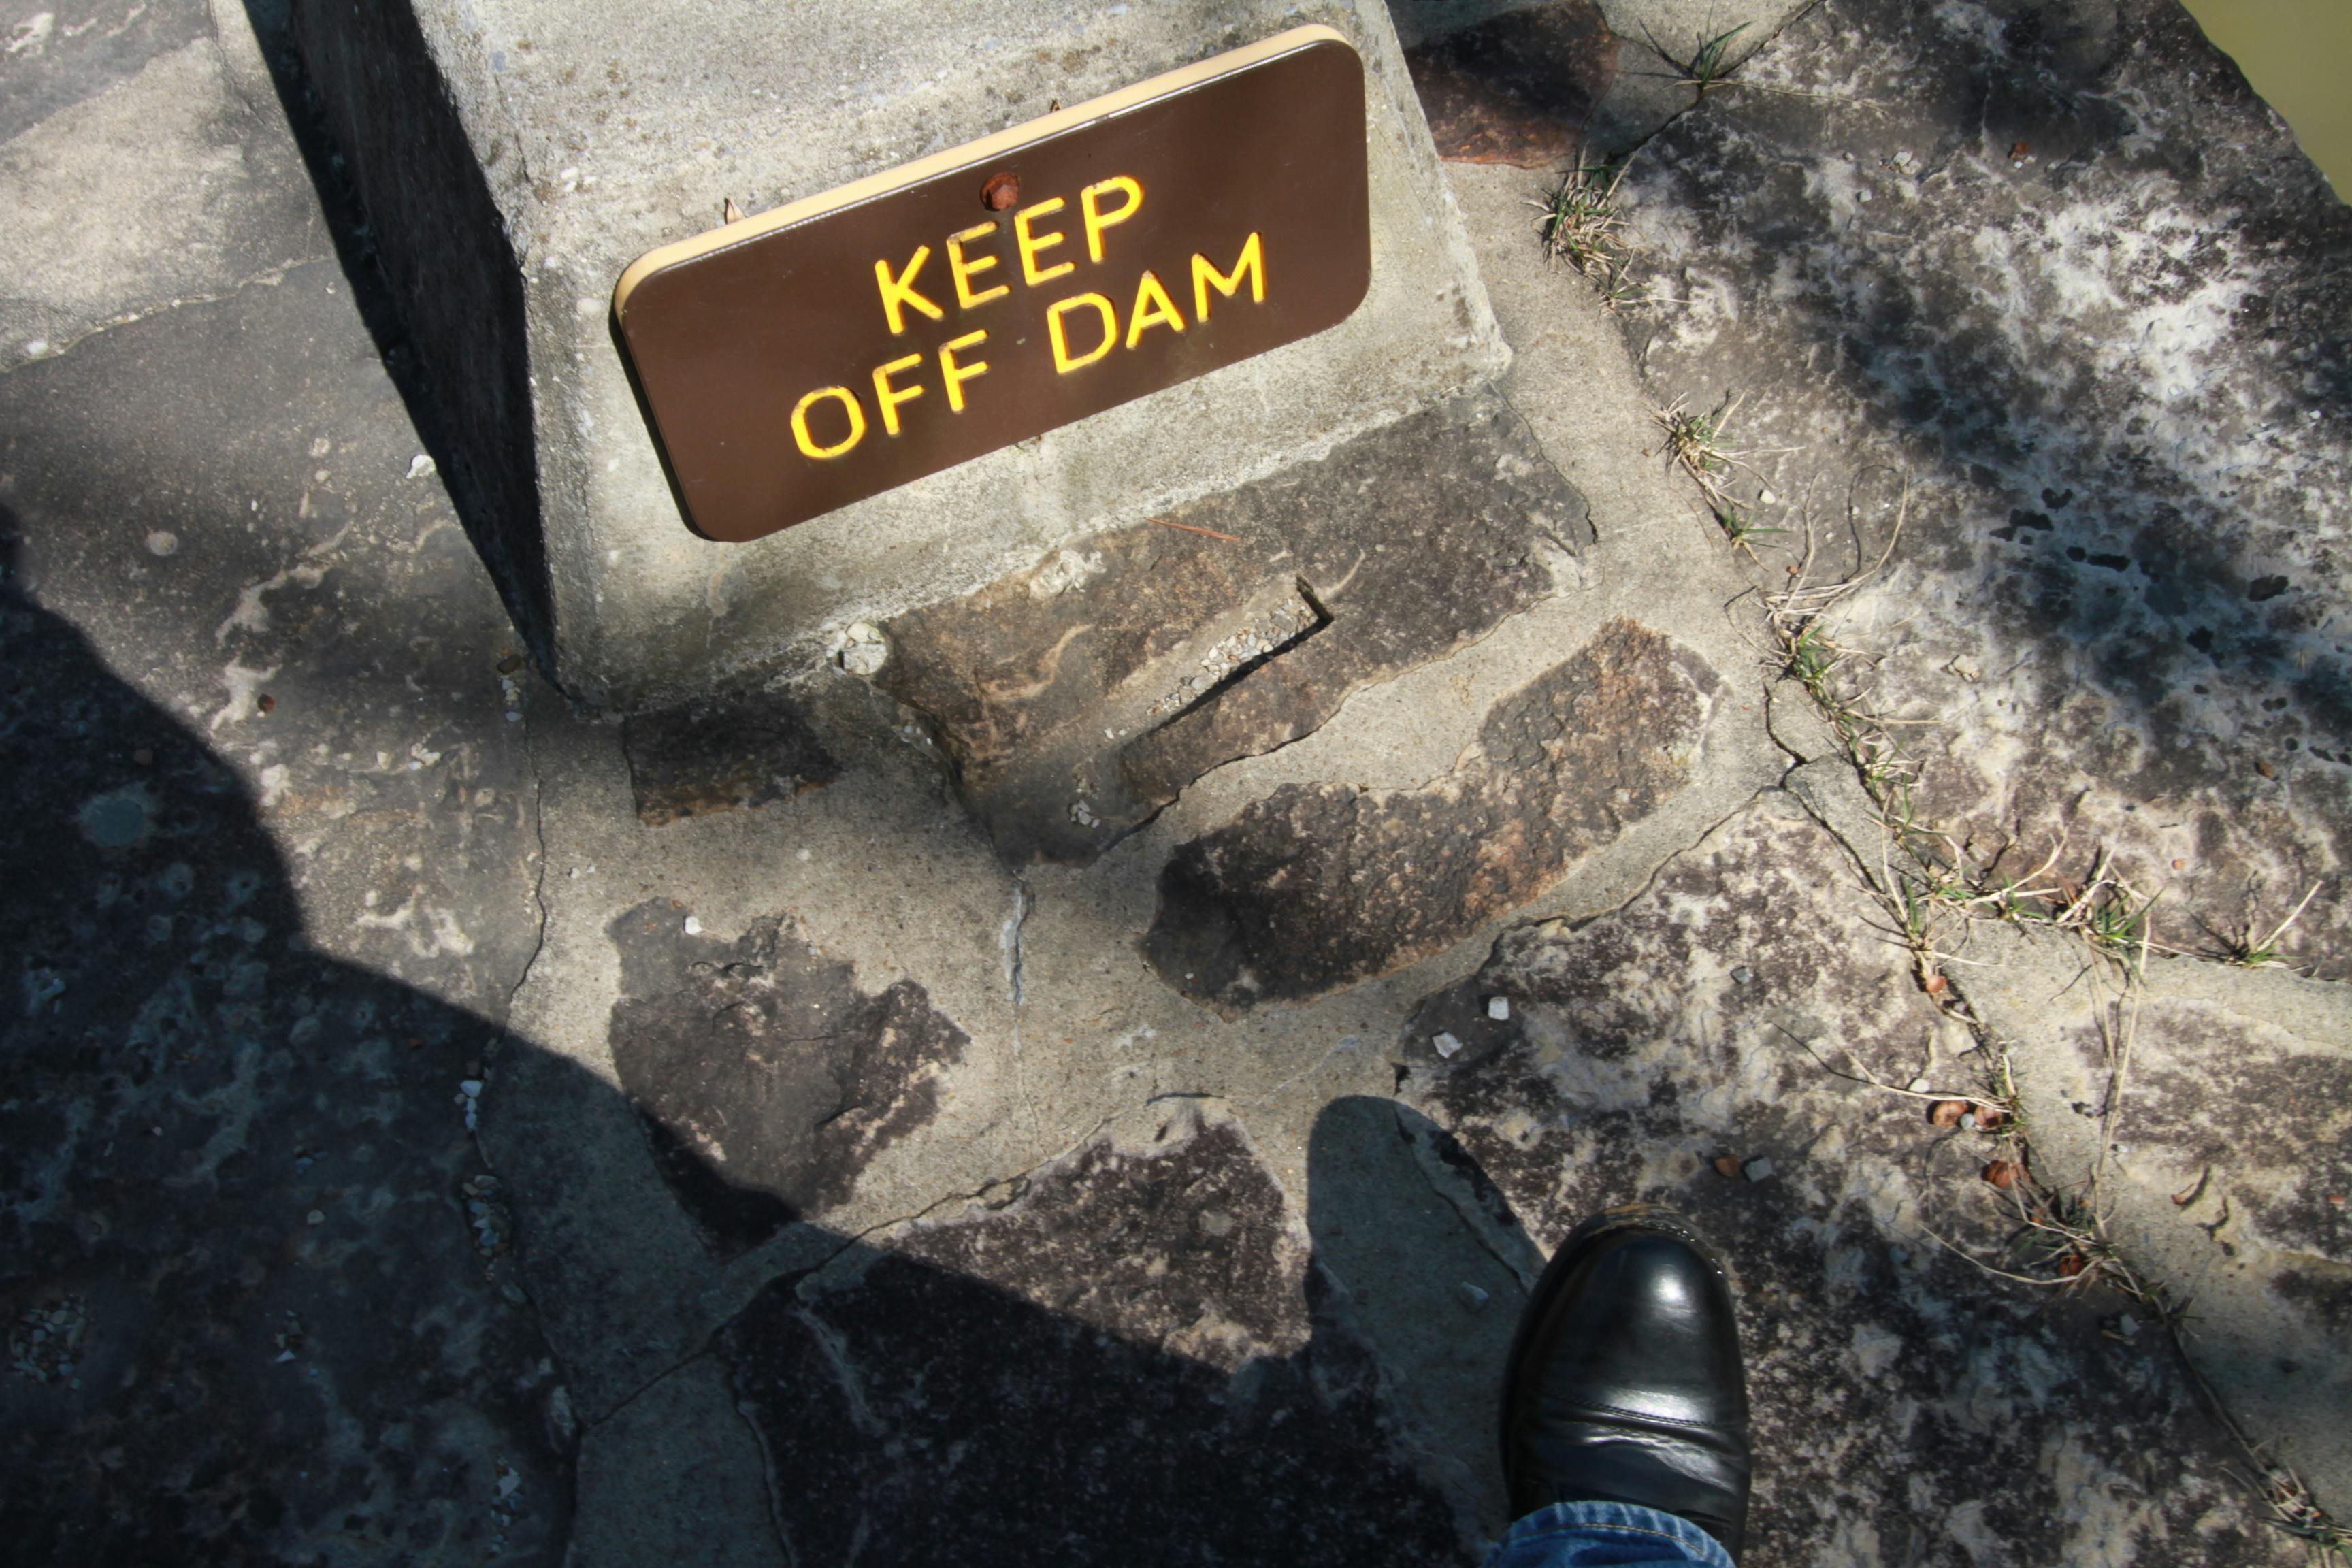 Free stock photo of dam, keep off, keep out